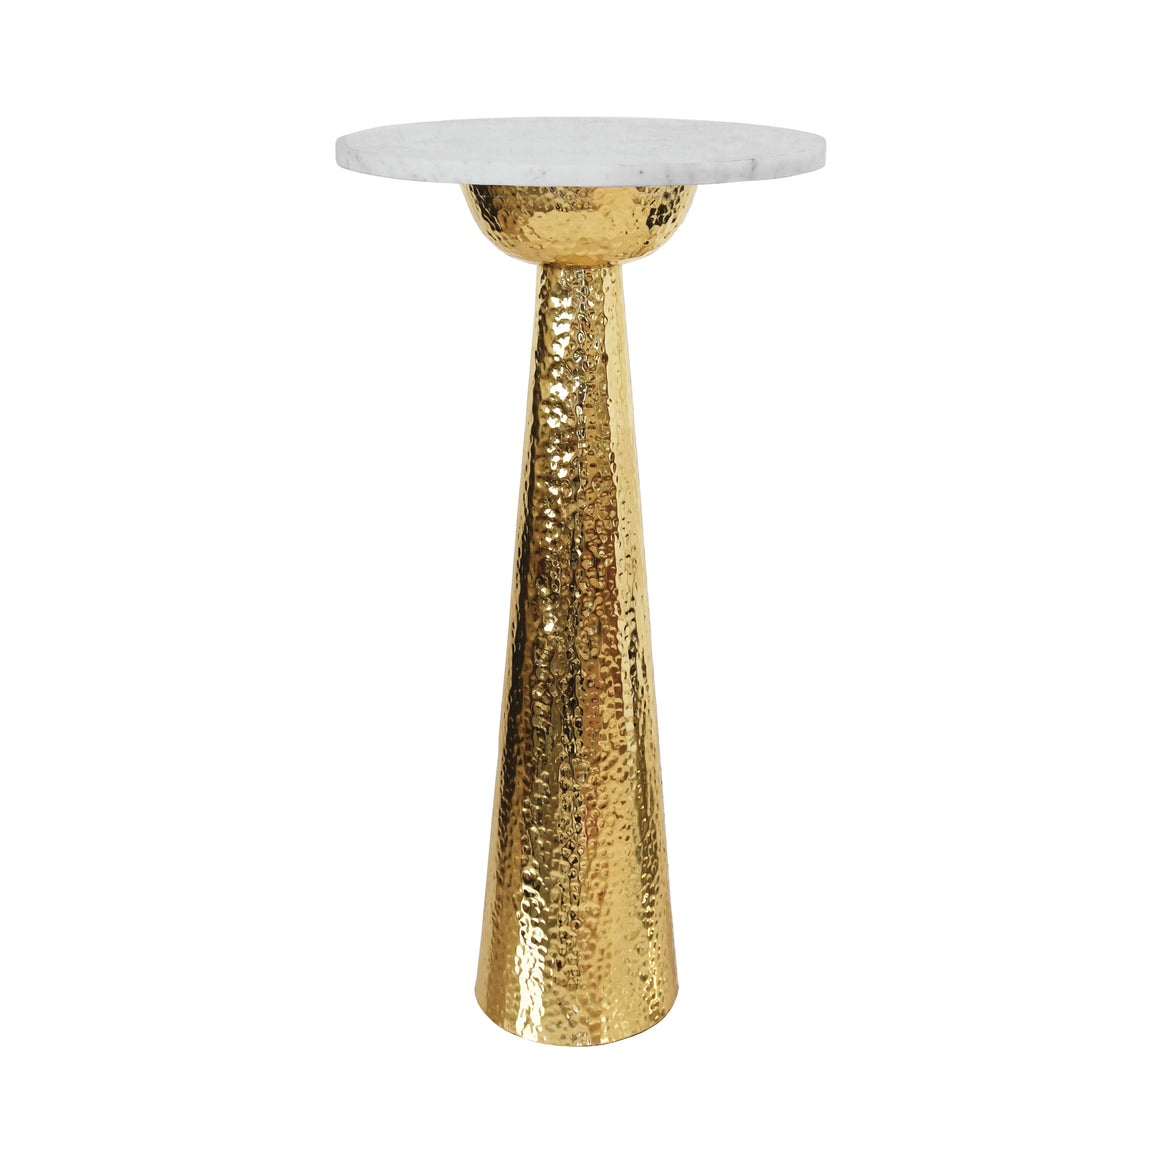 Hammered Brass Side Table with Tapered Base and Round White Marble Top